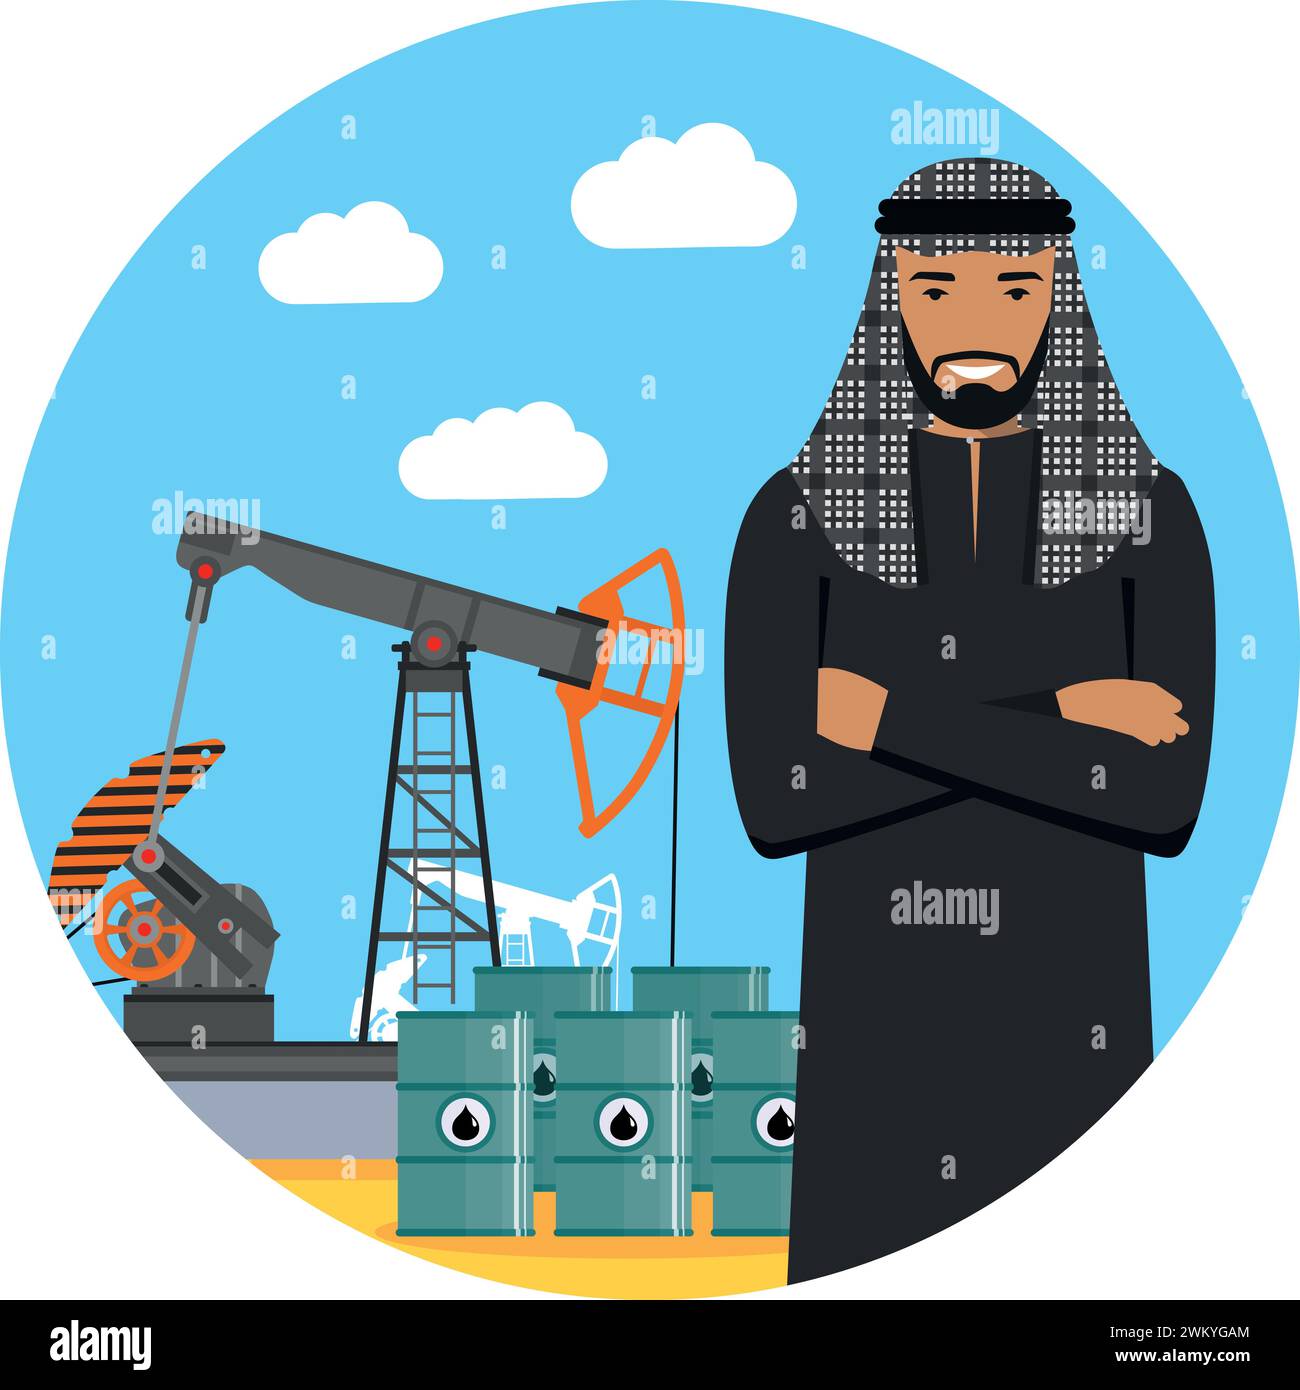 Arab Muslim Businessman with Oil pump and Barrels for Fuel. Vector Illustration Stock Vector